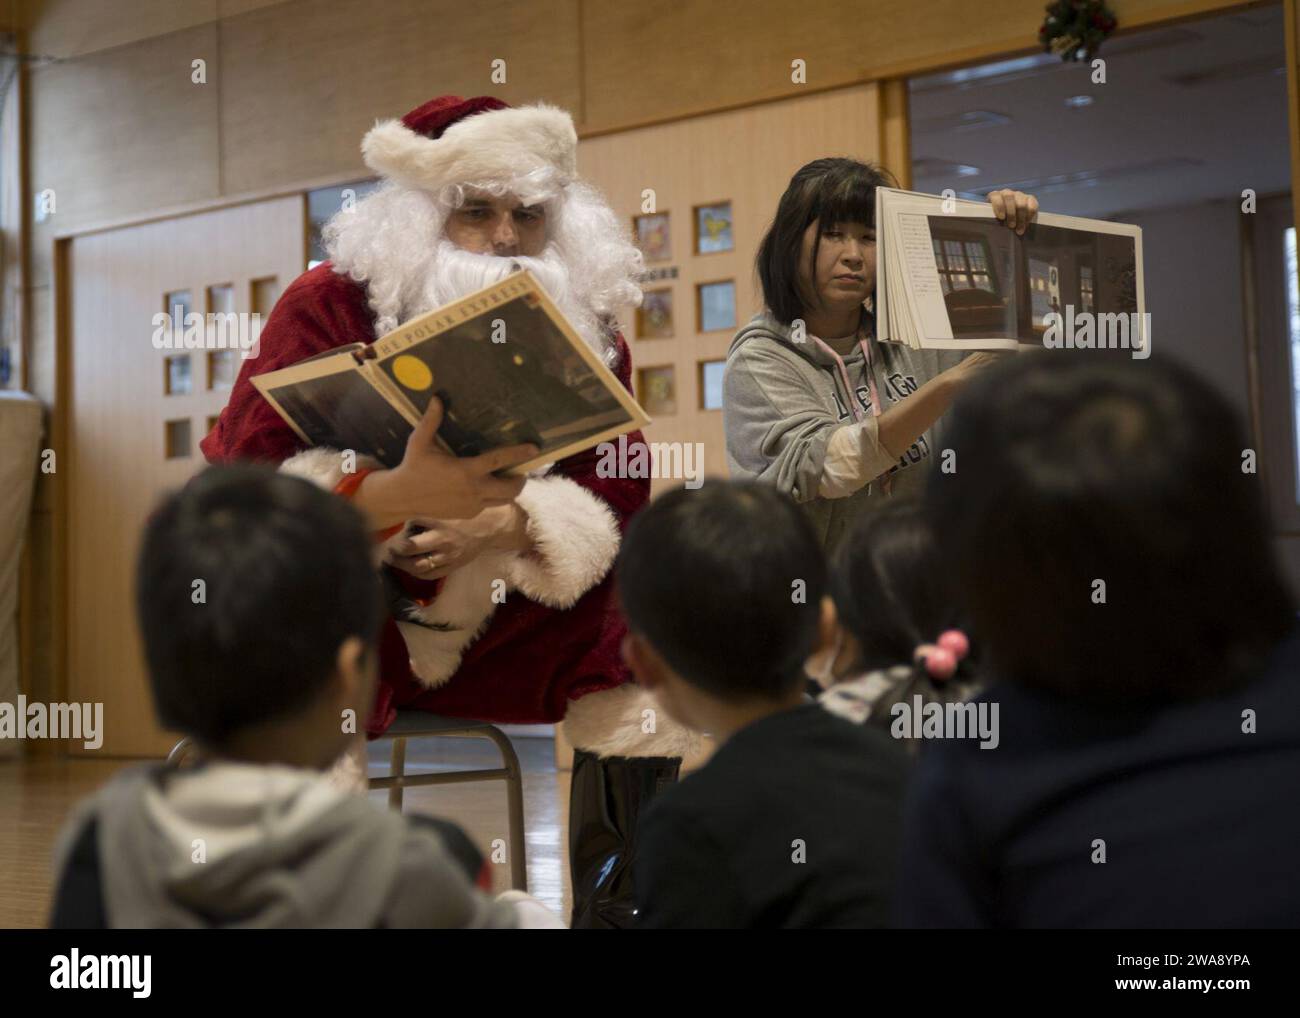 US military forces. 171218DA275-058 MISAWA, Japan (Dec. 18, 2017) Legalman 1st Class Donald McDowell, assigned to Naval Air Facility Misawa (NAFM), visits children at the Ohzora Jido-Kan, a Japanese after school care center, dressed as Santa Claus for a special holiday themed visit. Sailors from NAFM volunteer to make bi-weekly visits to the after school care center as part of community relations efforts. (U.S. Navy photo by Mass Communication Specialist 3rd Class Samuel Bacon/Released) Stock Photo